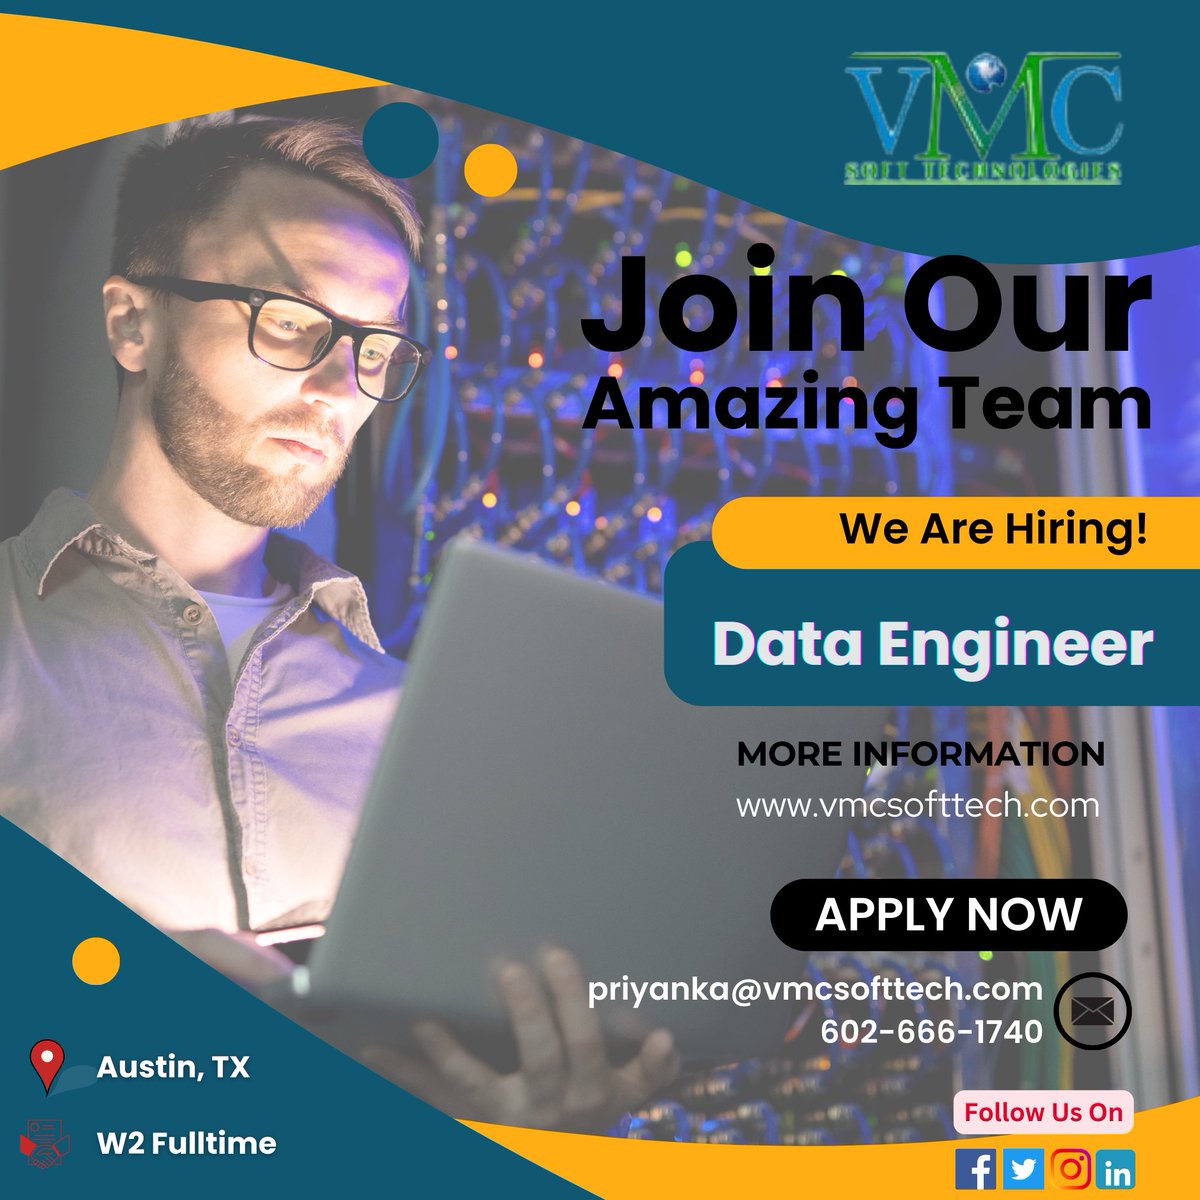 VMC Soft Technologies looking for a Data Engineer in Austin,TX Job Title: Data Engineer Locations: Austin , TX Contract: W2 Full-Time For more details: priyanka@vmcsofttech.com/ 602-666-1740 #dataengineering #datascience #bigdata #machinelearning #artificialintelligence